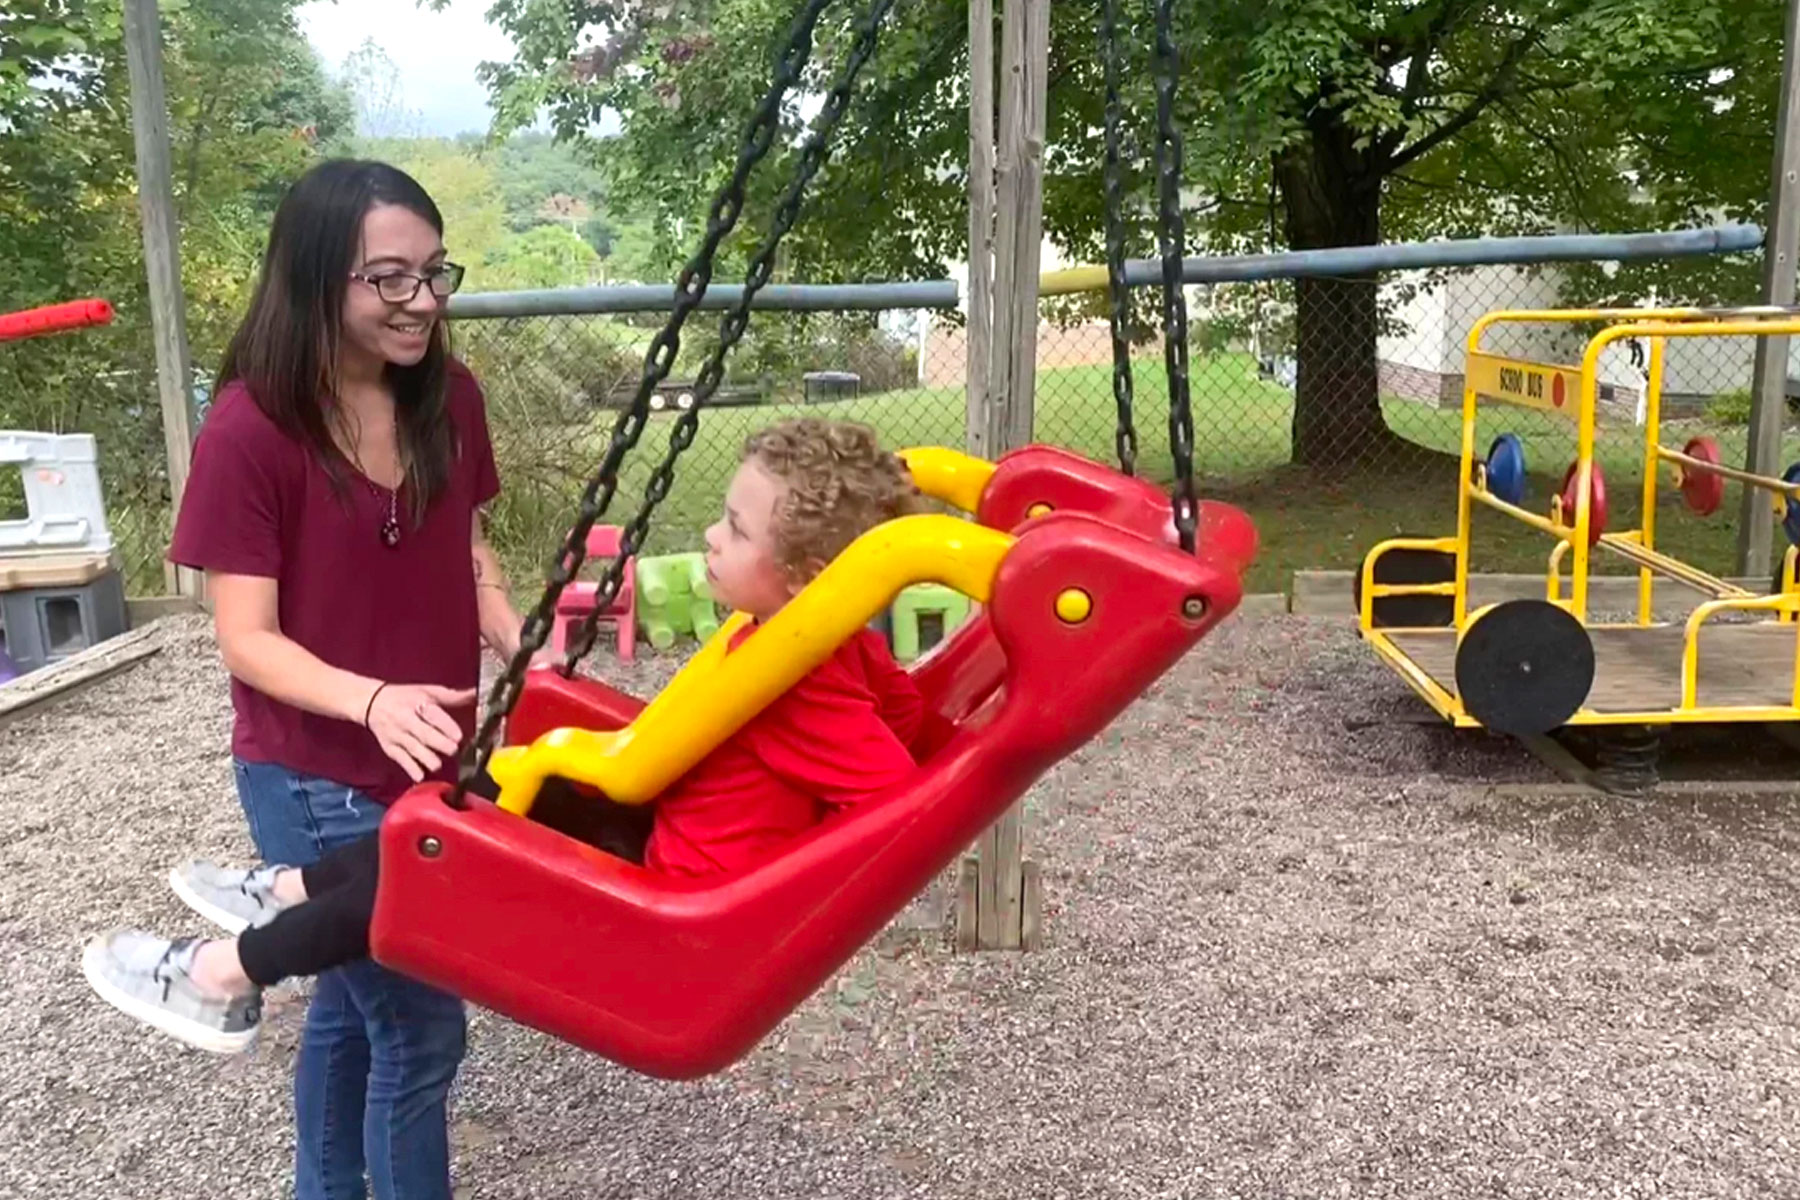 A women stands in front of a child swinging in a red toddler swing on a playground.